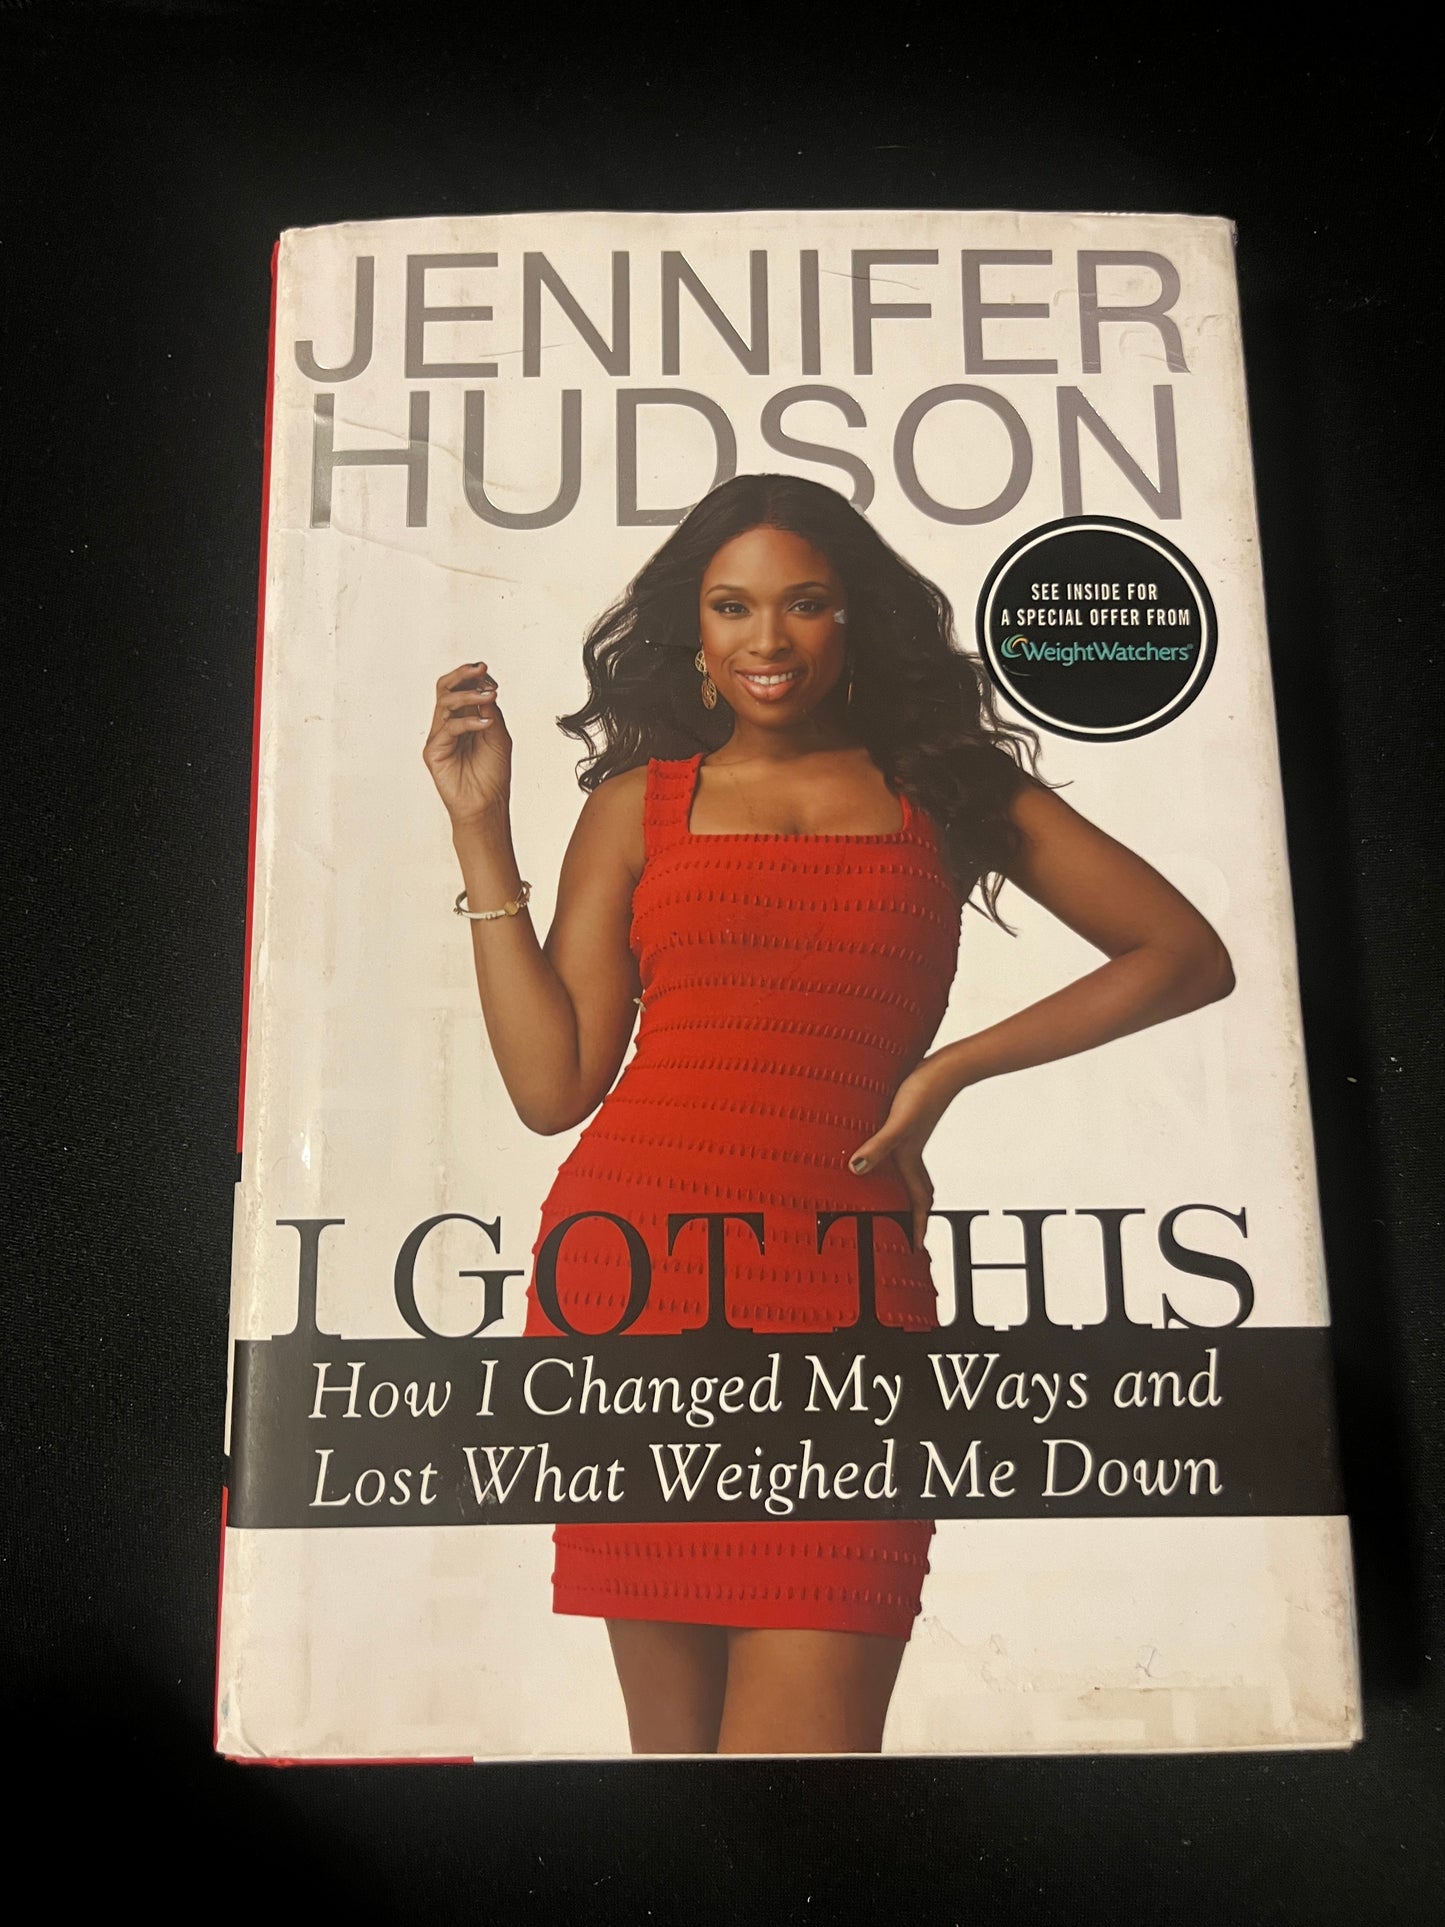 I GOT THIS: HOW I CHANGED MY WAYS AND LOST WHAT WEIGHED ME DOWN by Jennifer Hudson